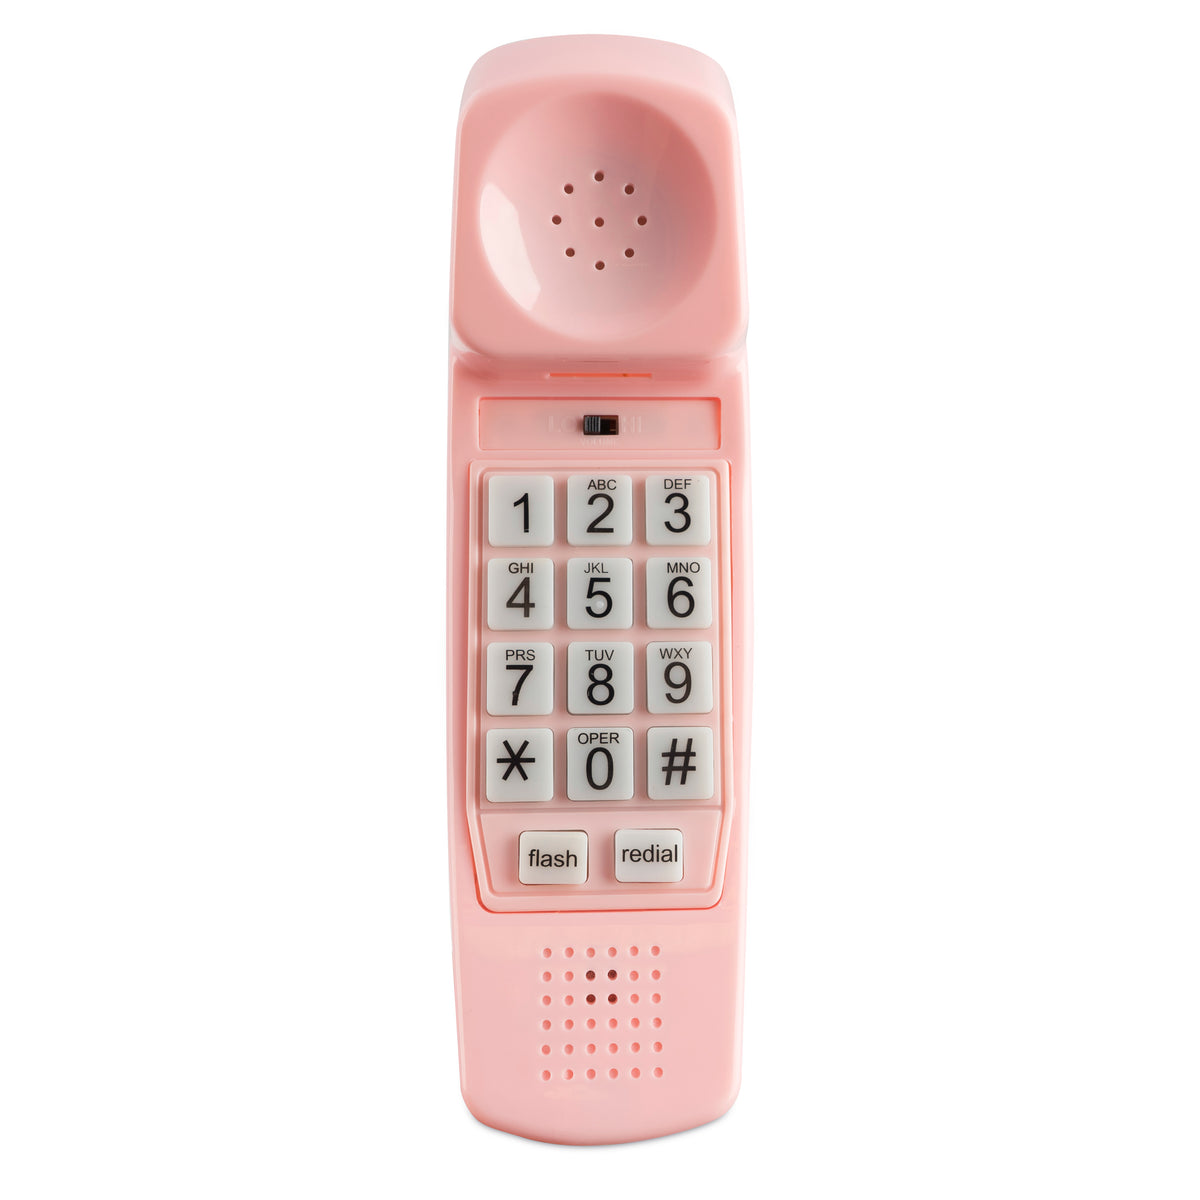 iSoHo Phones - Rediscover Timeless Connectivity: Big Button Corded Phone - Elegance Meets Simplicity for Your Home Office and Senior Loved Ones, Ladies Pink